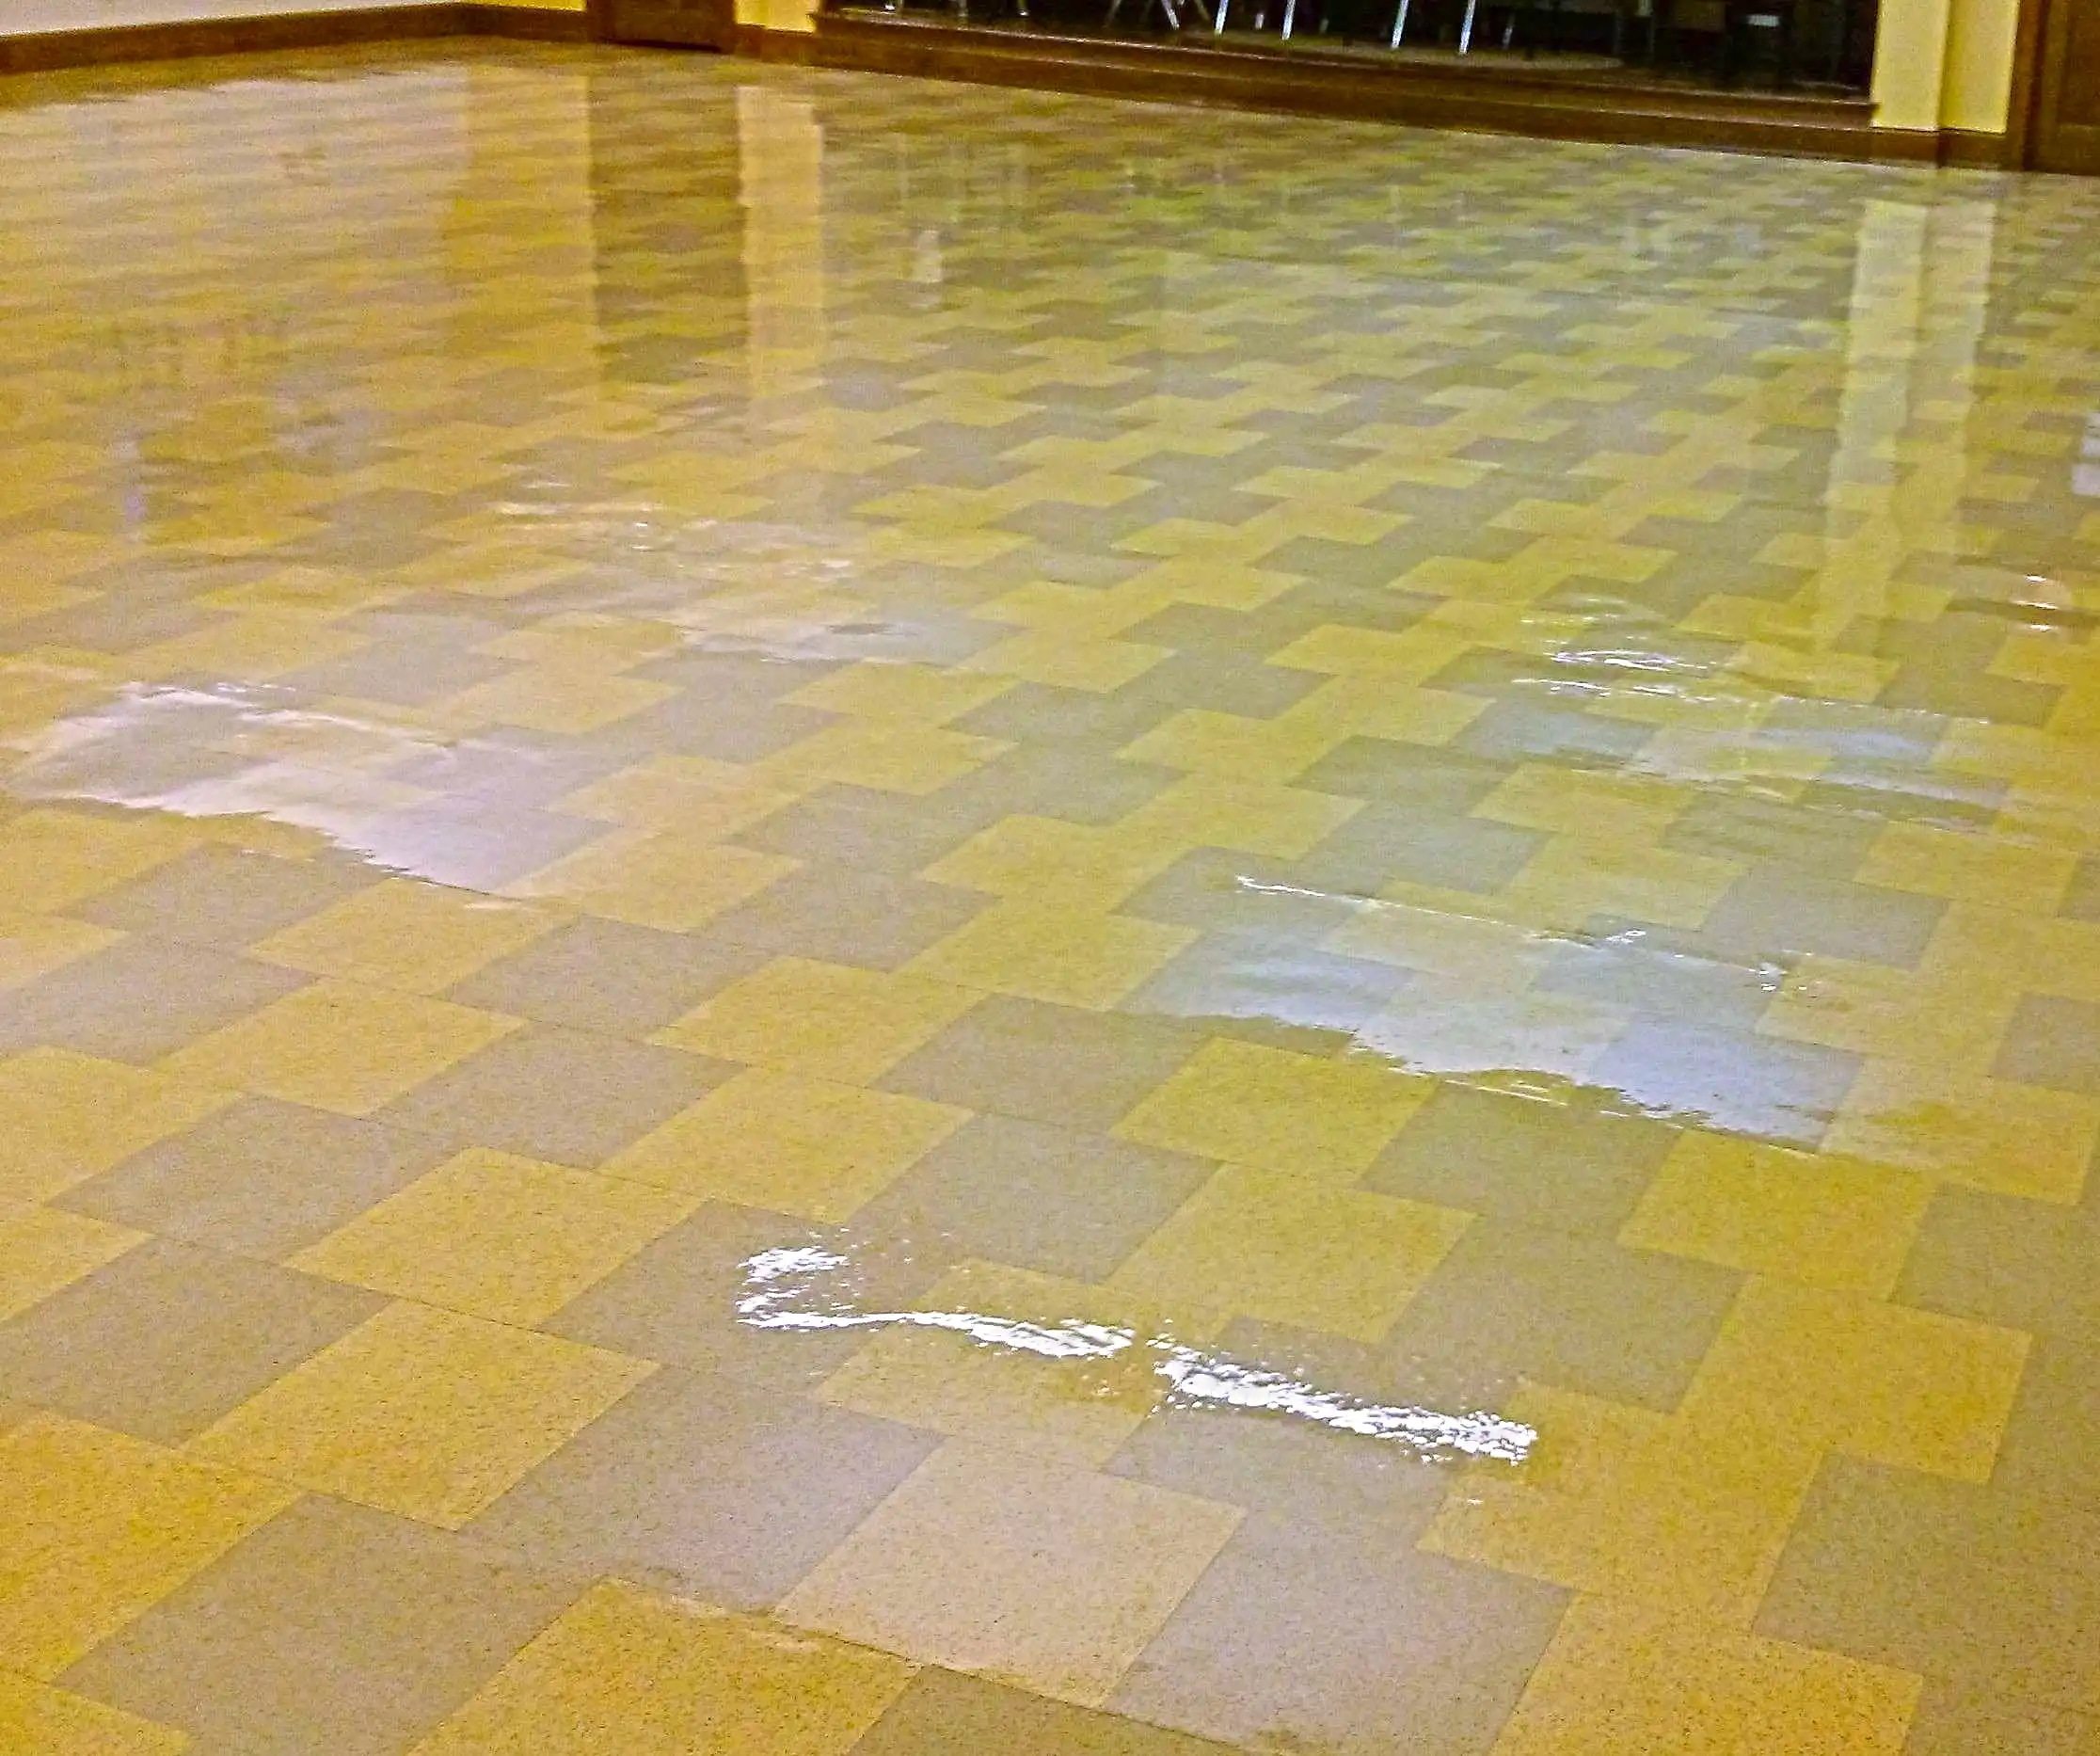 restoration-of-old-vct-floor-in-minneapolis-church